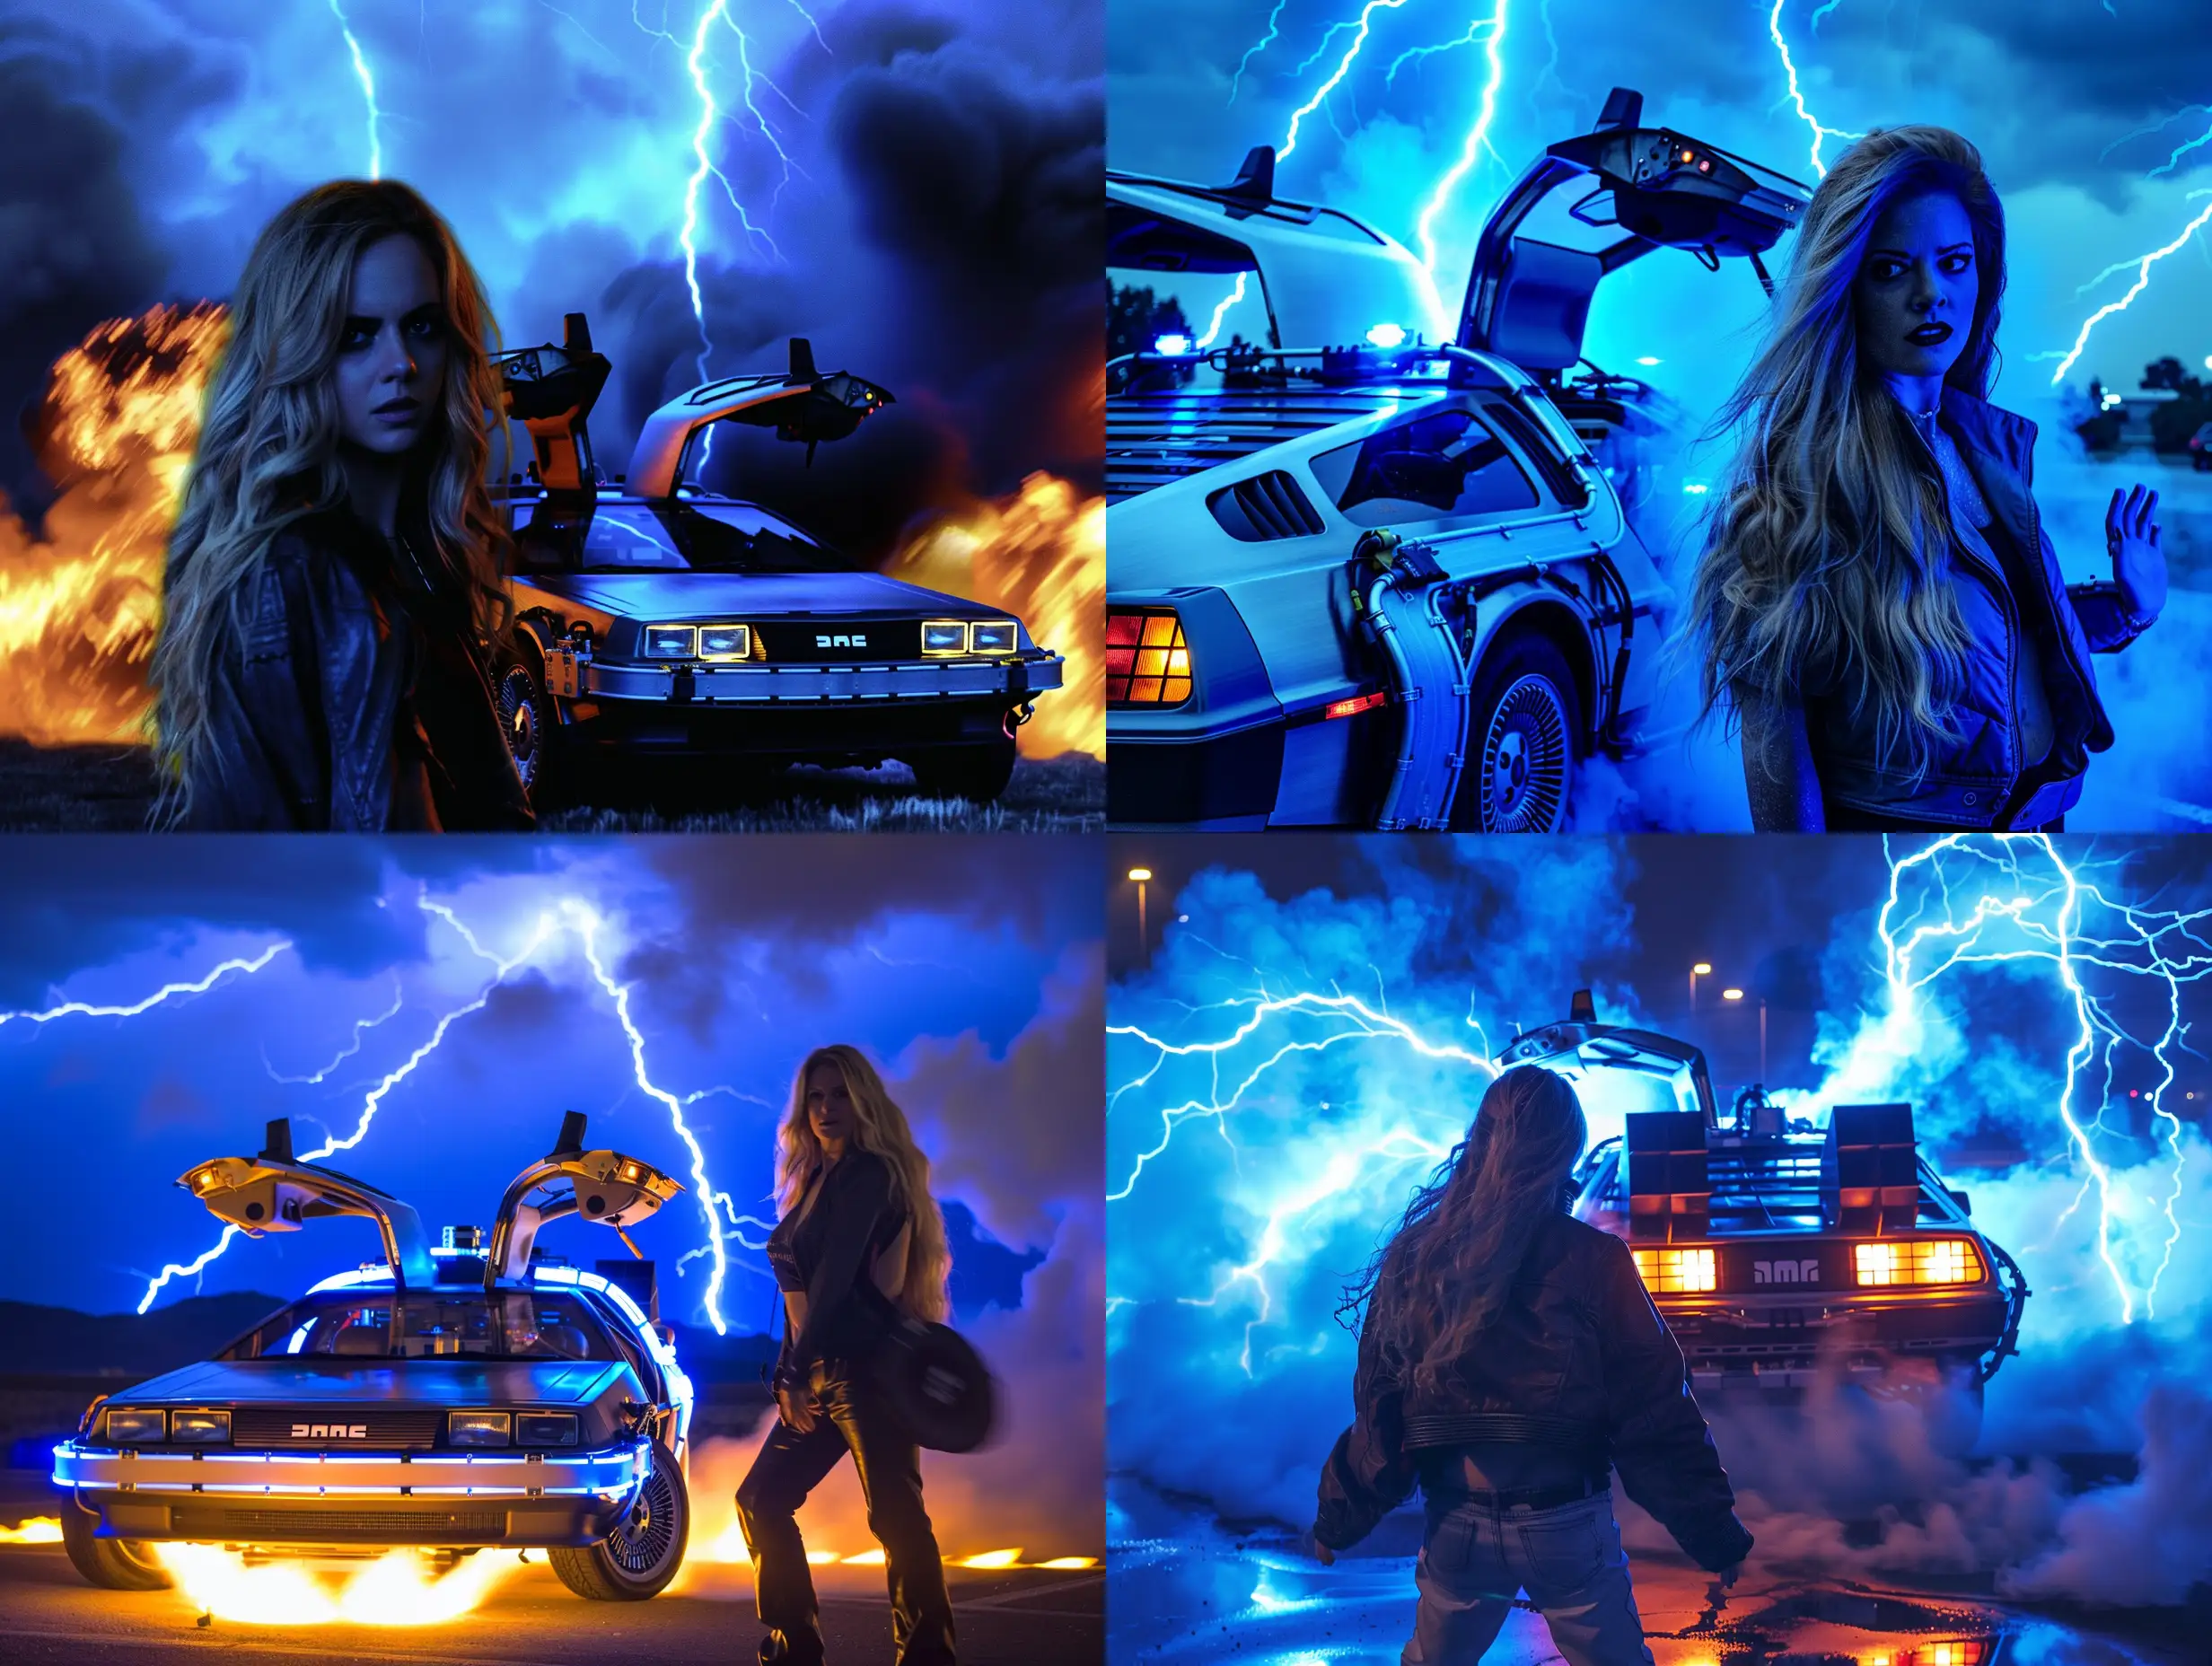 Alicia Silverstone in foreground with Back to the future delorean in background. Lit up, scifi, vivid blue lightning in sky, smoky, fire trails, artistic, 